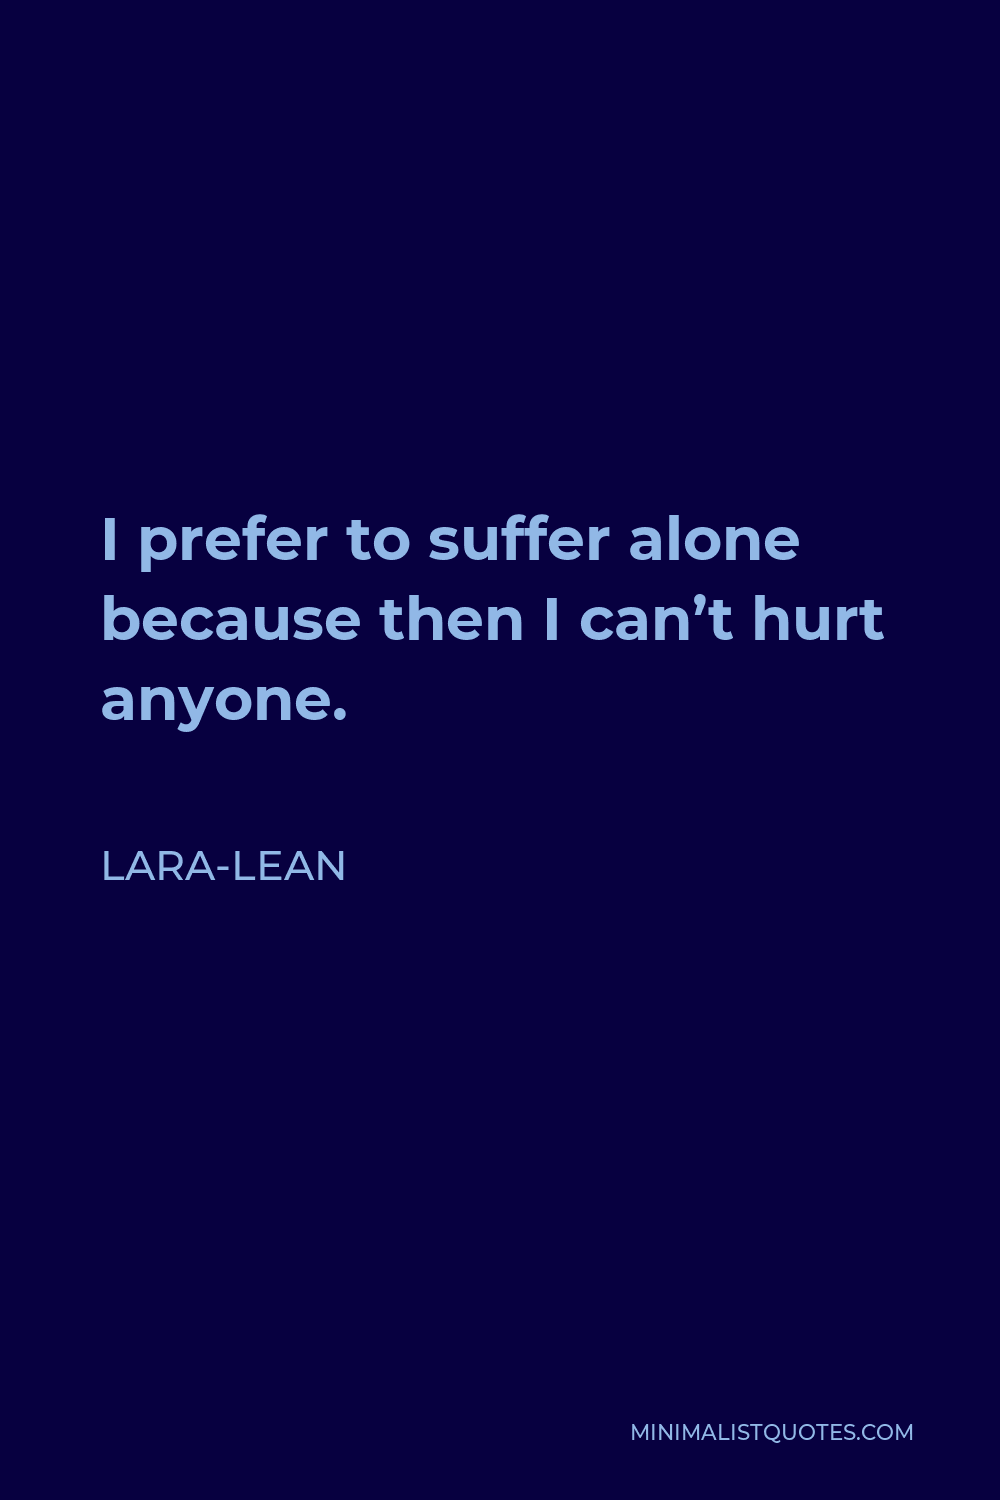 Lara-Lean Quote - I prefer to suffer alone because then I can’t hurt anyone.